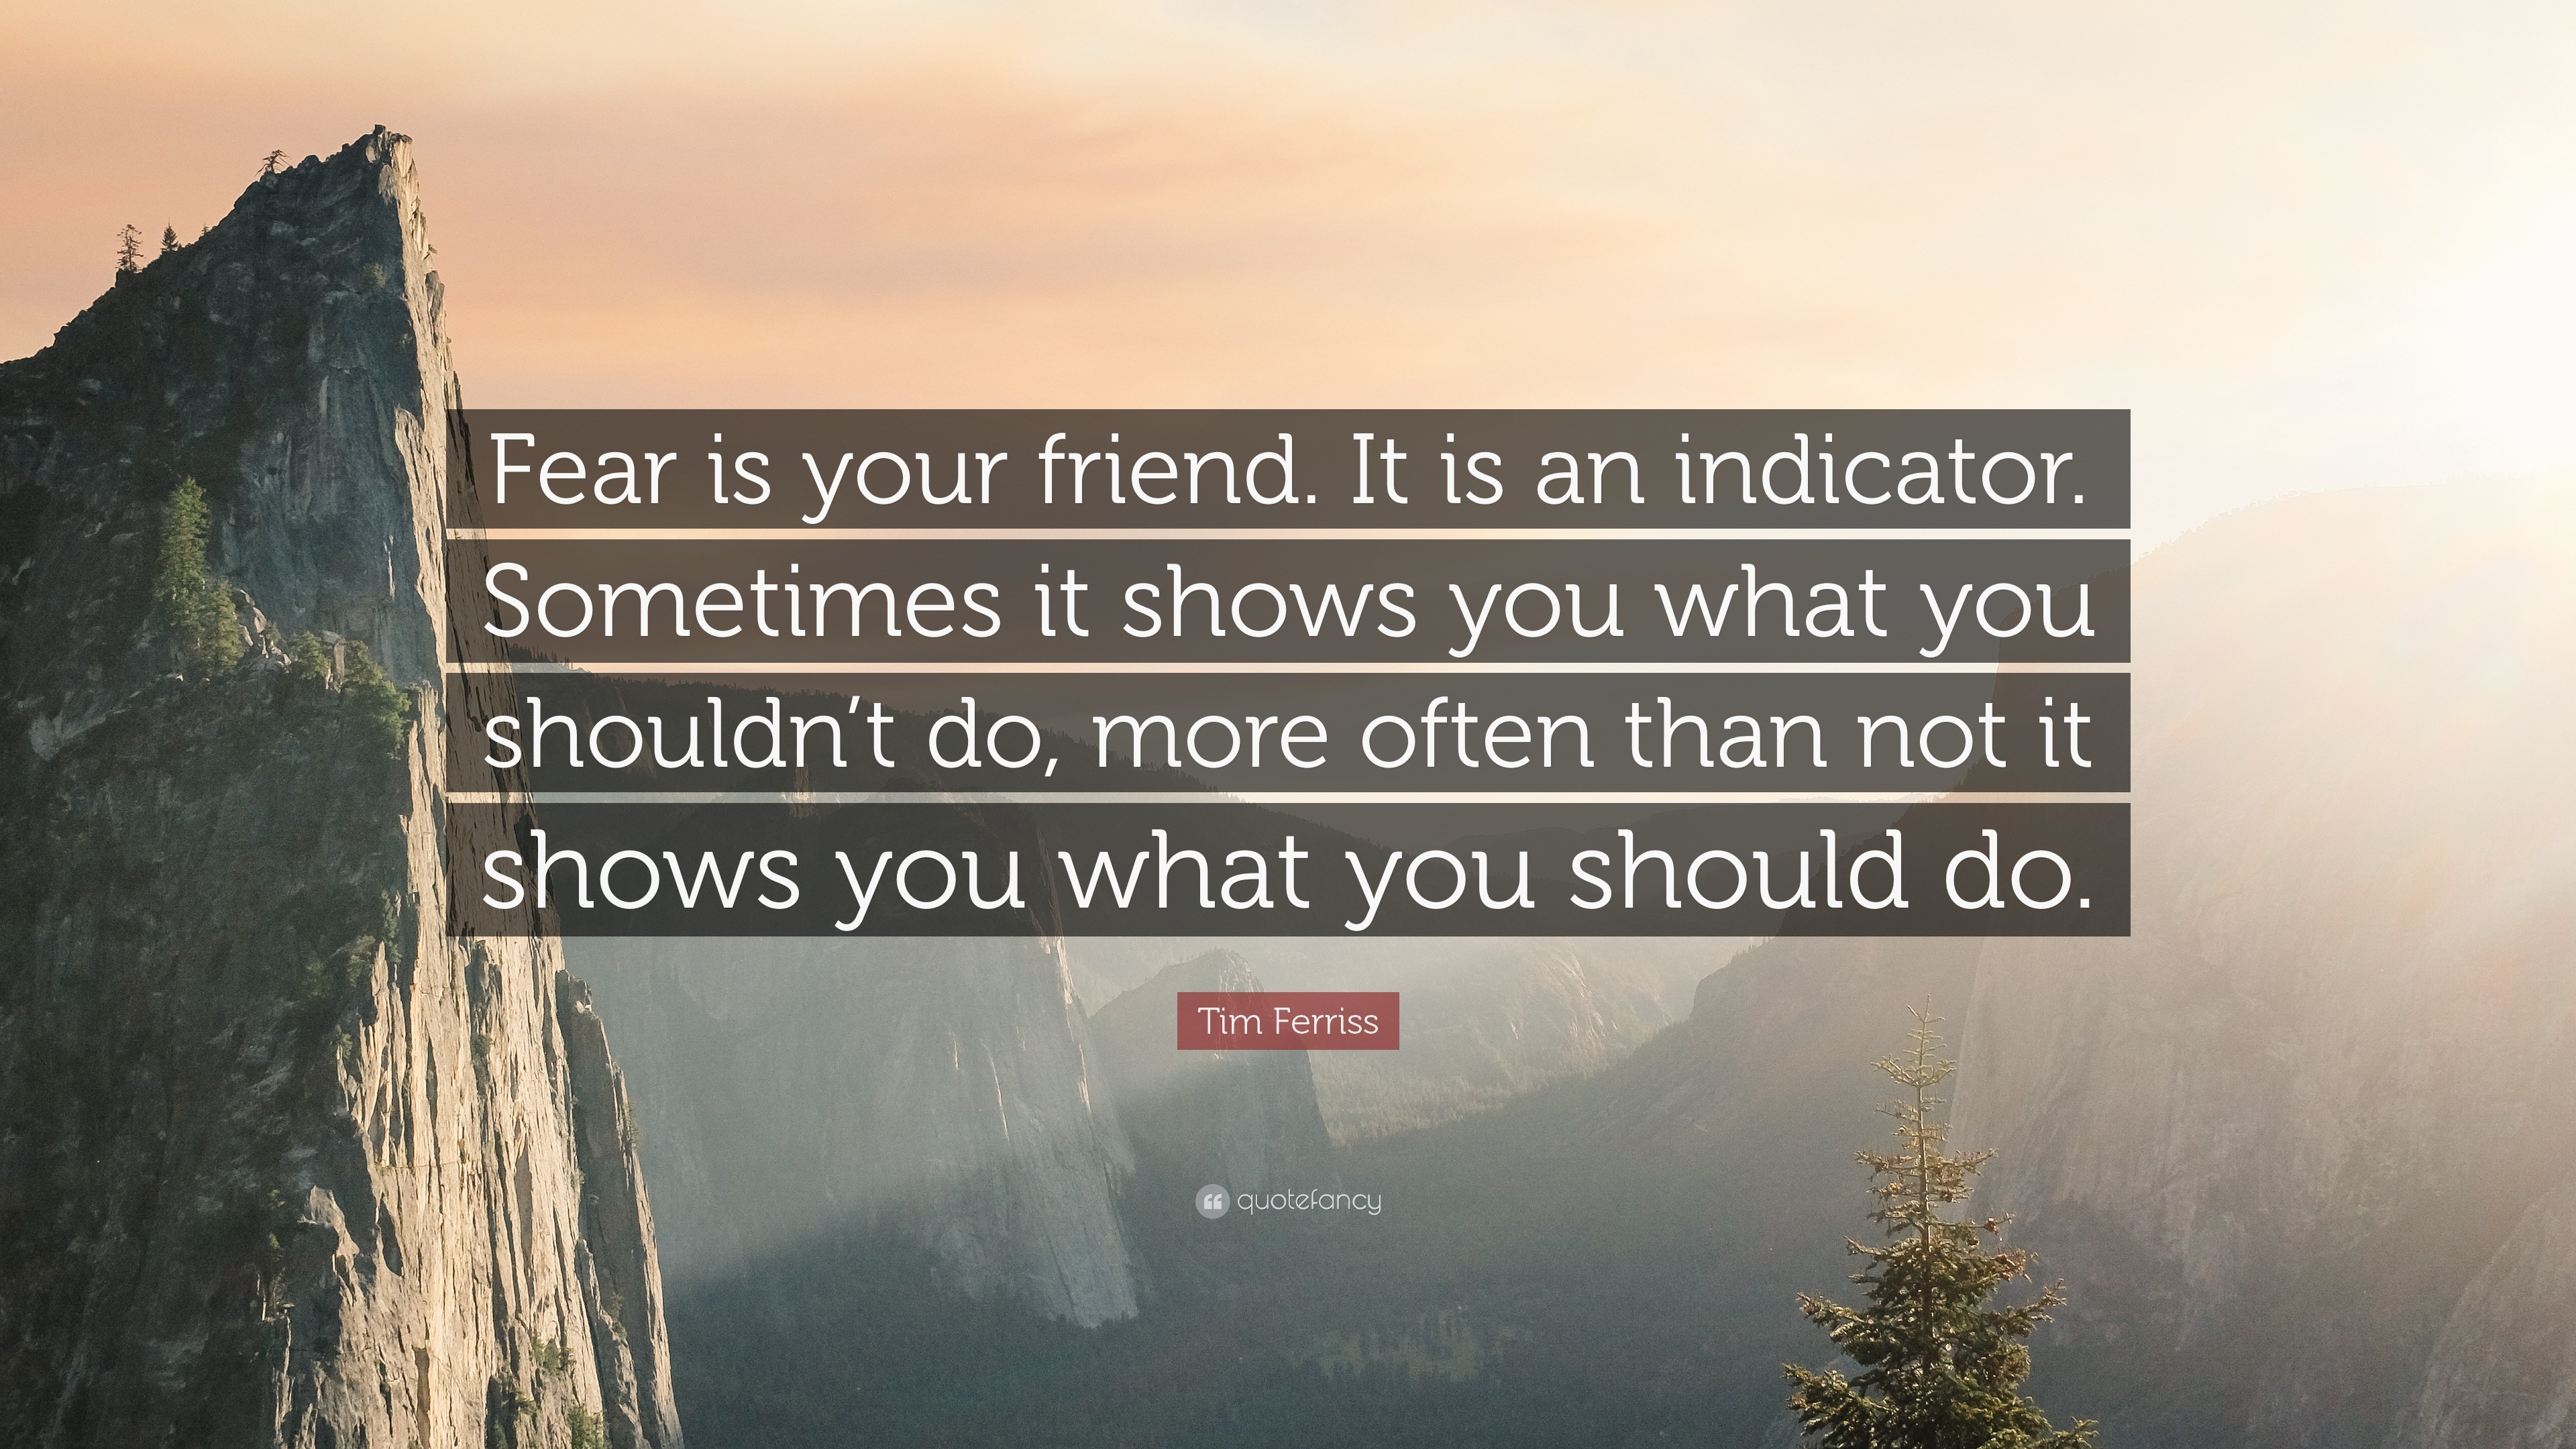 Tim Quote: “Fear is your friend. It is an indicator. Sometimes it shows you what you shouldn't do, more often than not it shows ...”